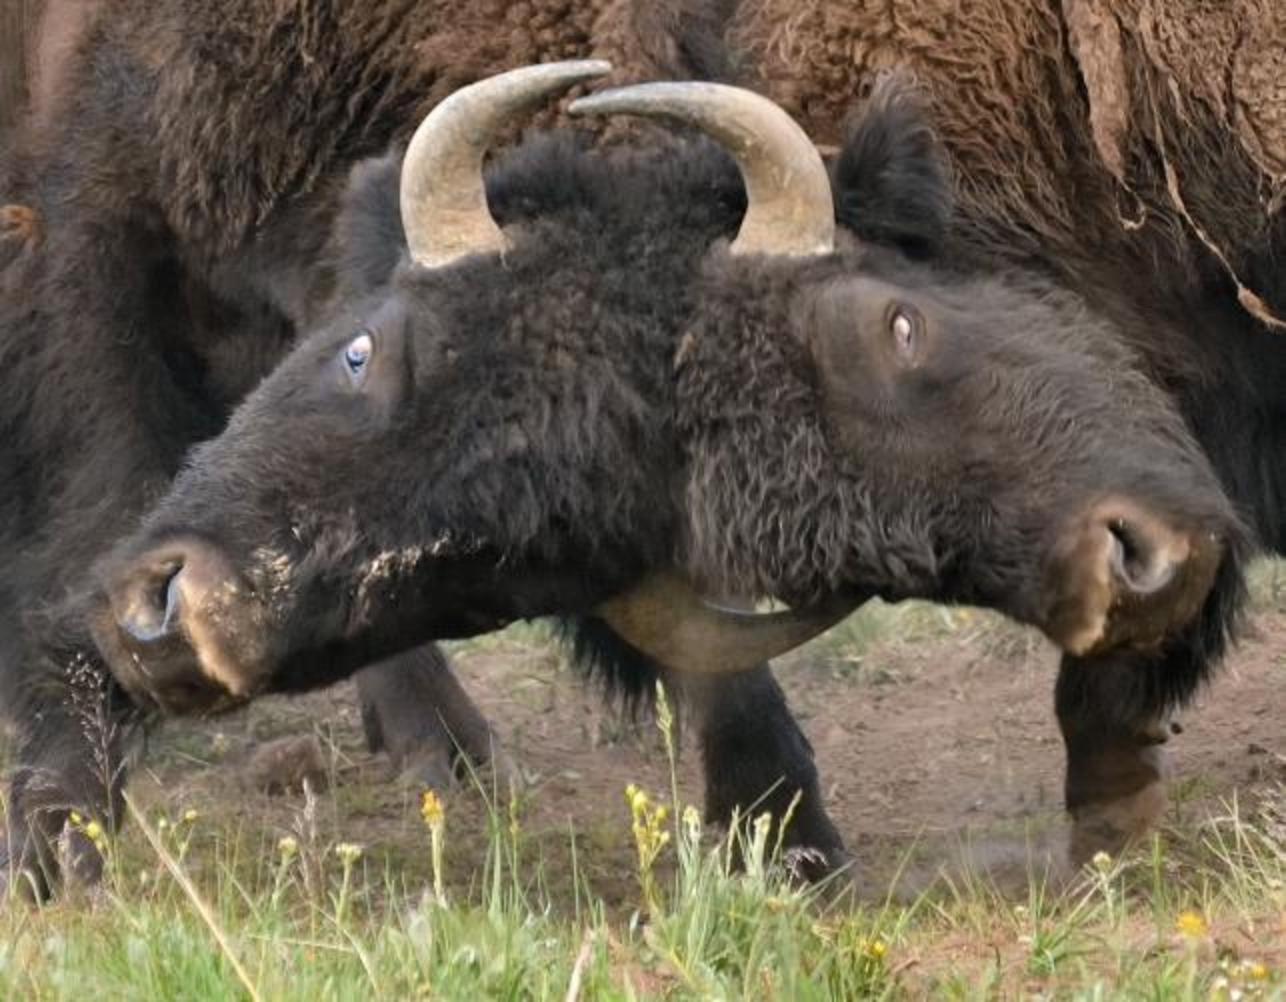 A couple of young bulls working out the prep for the buffalo breeding olympics to begin. An opportunity to plant their genes is still years in the future. When and if they live long enough they will have the mass and aggression to compete as a member of the apex of the heavyweight breeding bull elite.